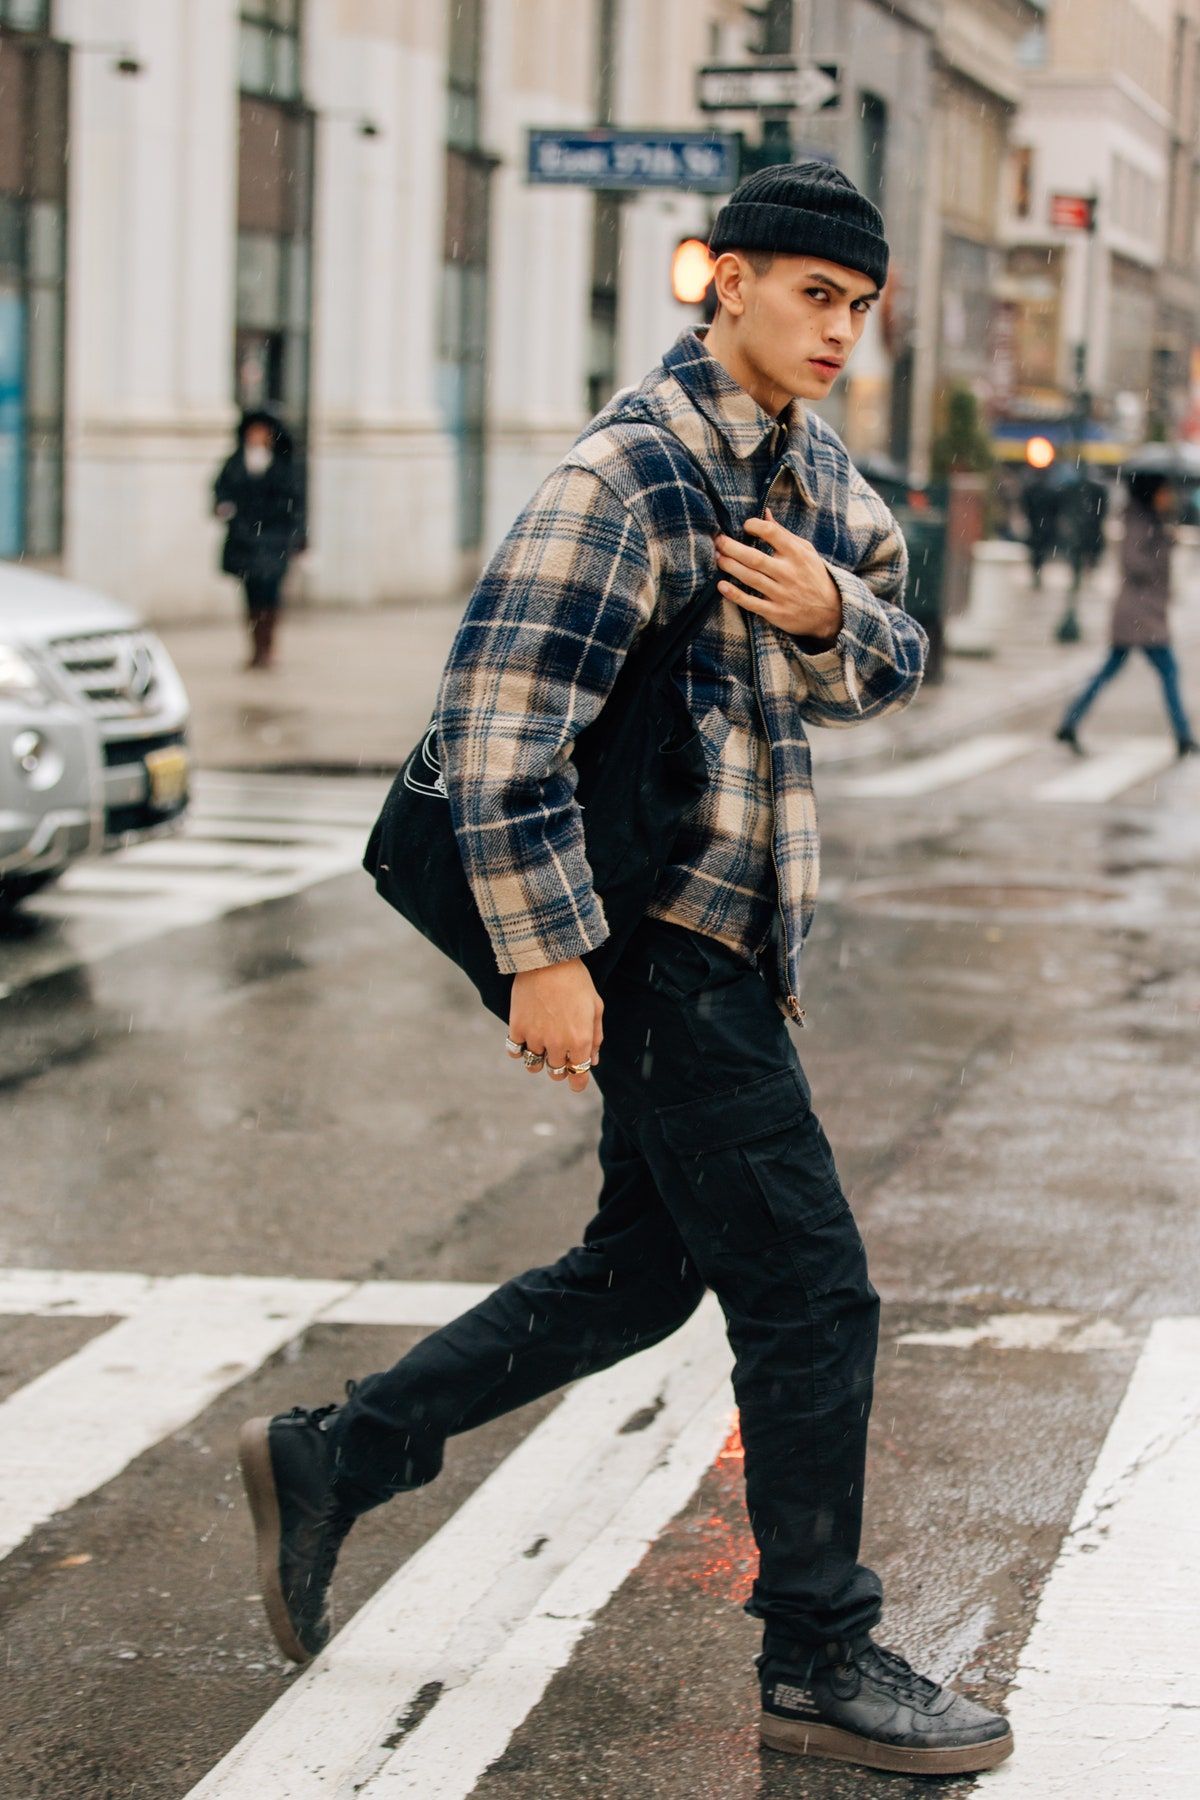 The Best Men's Street Style from New York Fashion Week - The Best Men's Street Style from New York Fashion Week -   17 style Street mens ideas